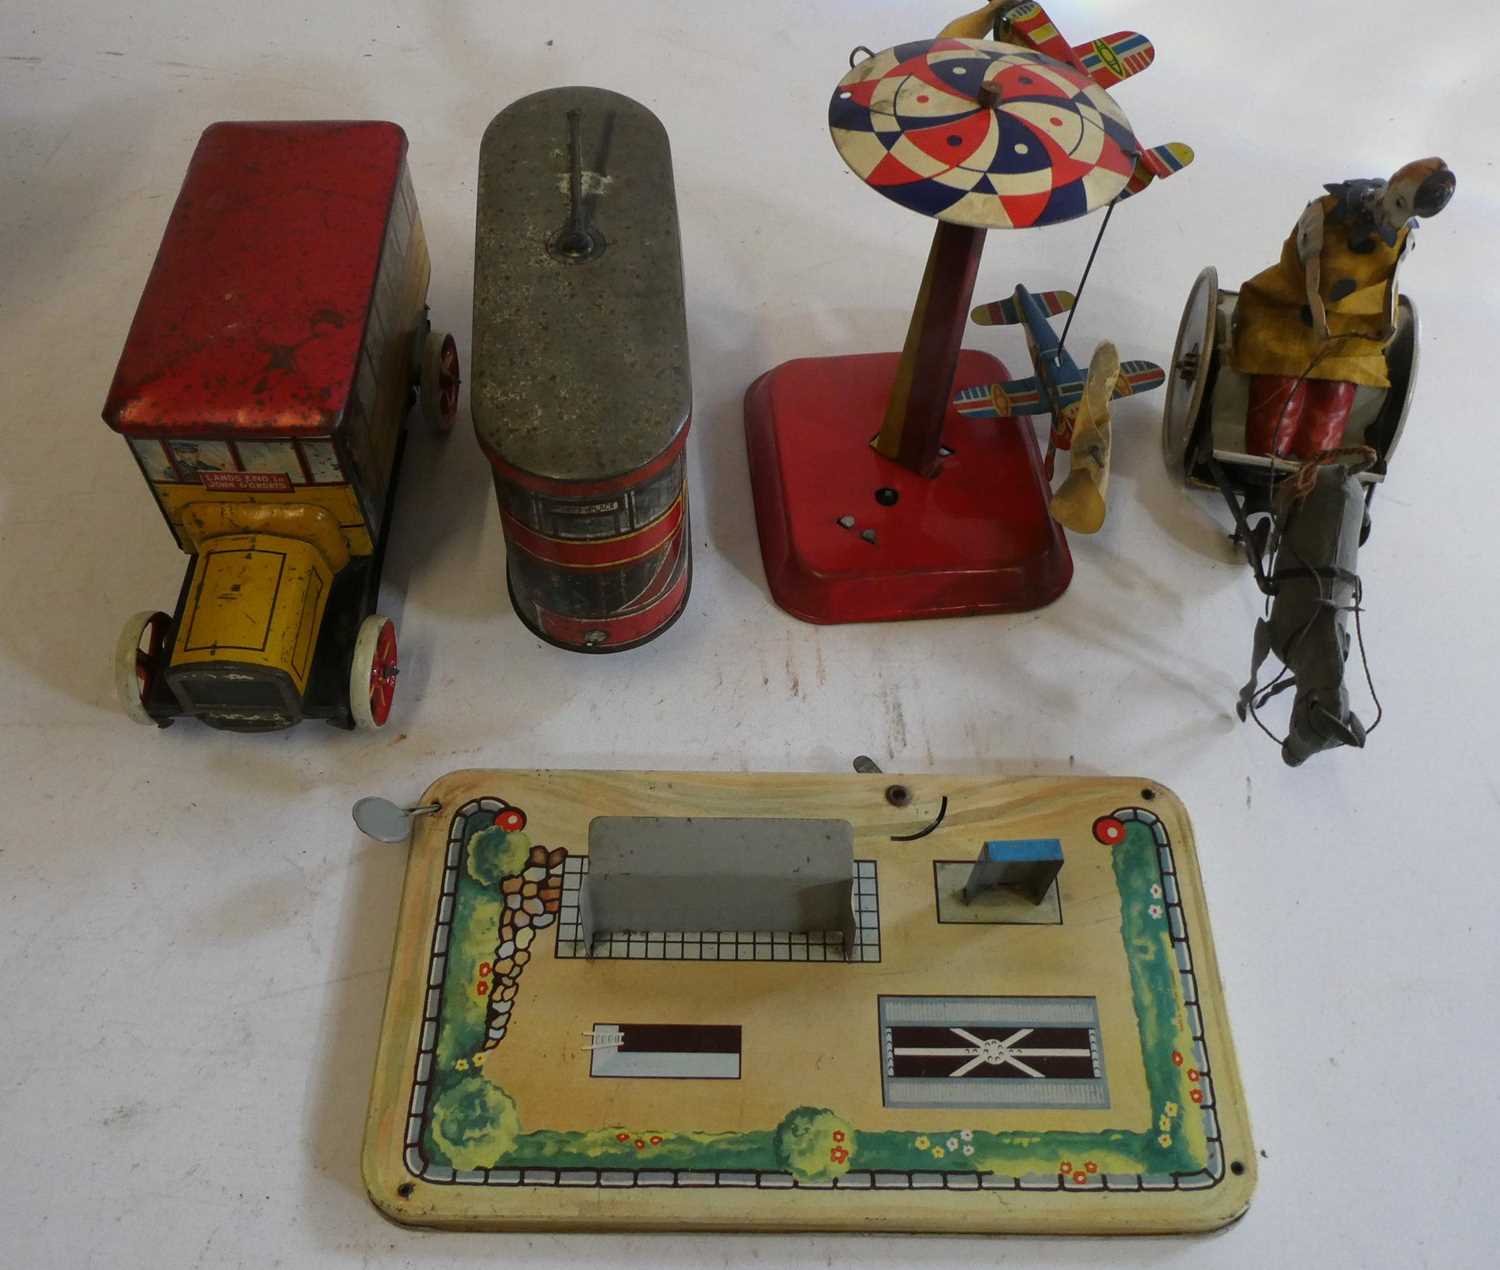 Tinplate biscuit tin tram and Gray Dunn’s biscuits bus, some rusting, paint damage fair and a